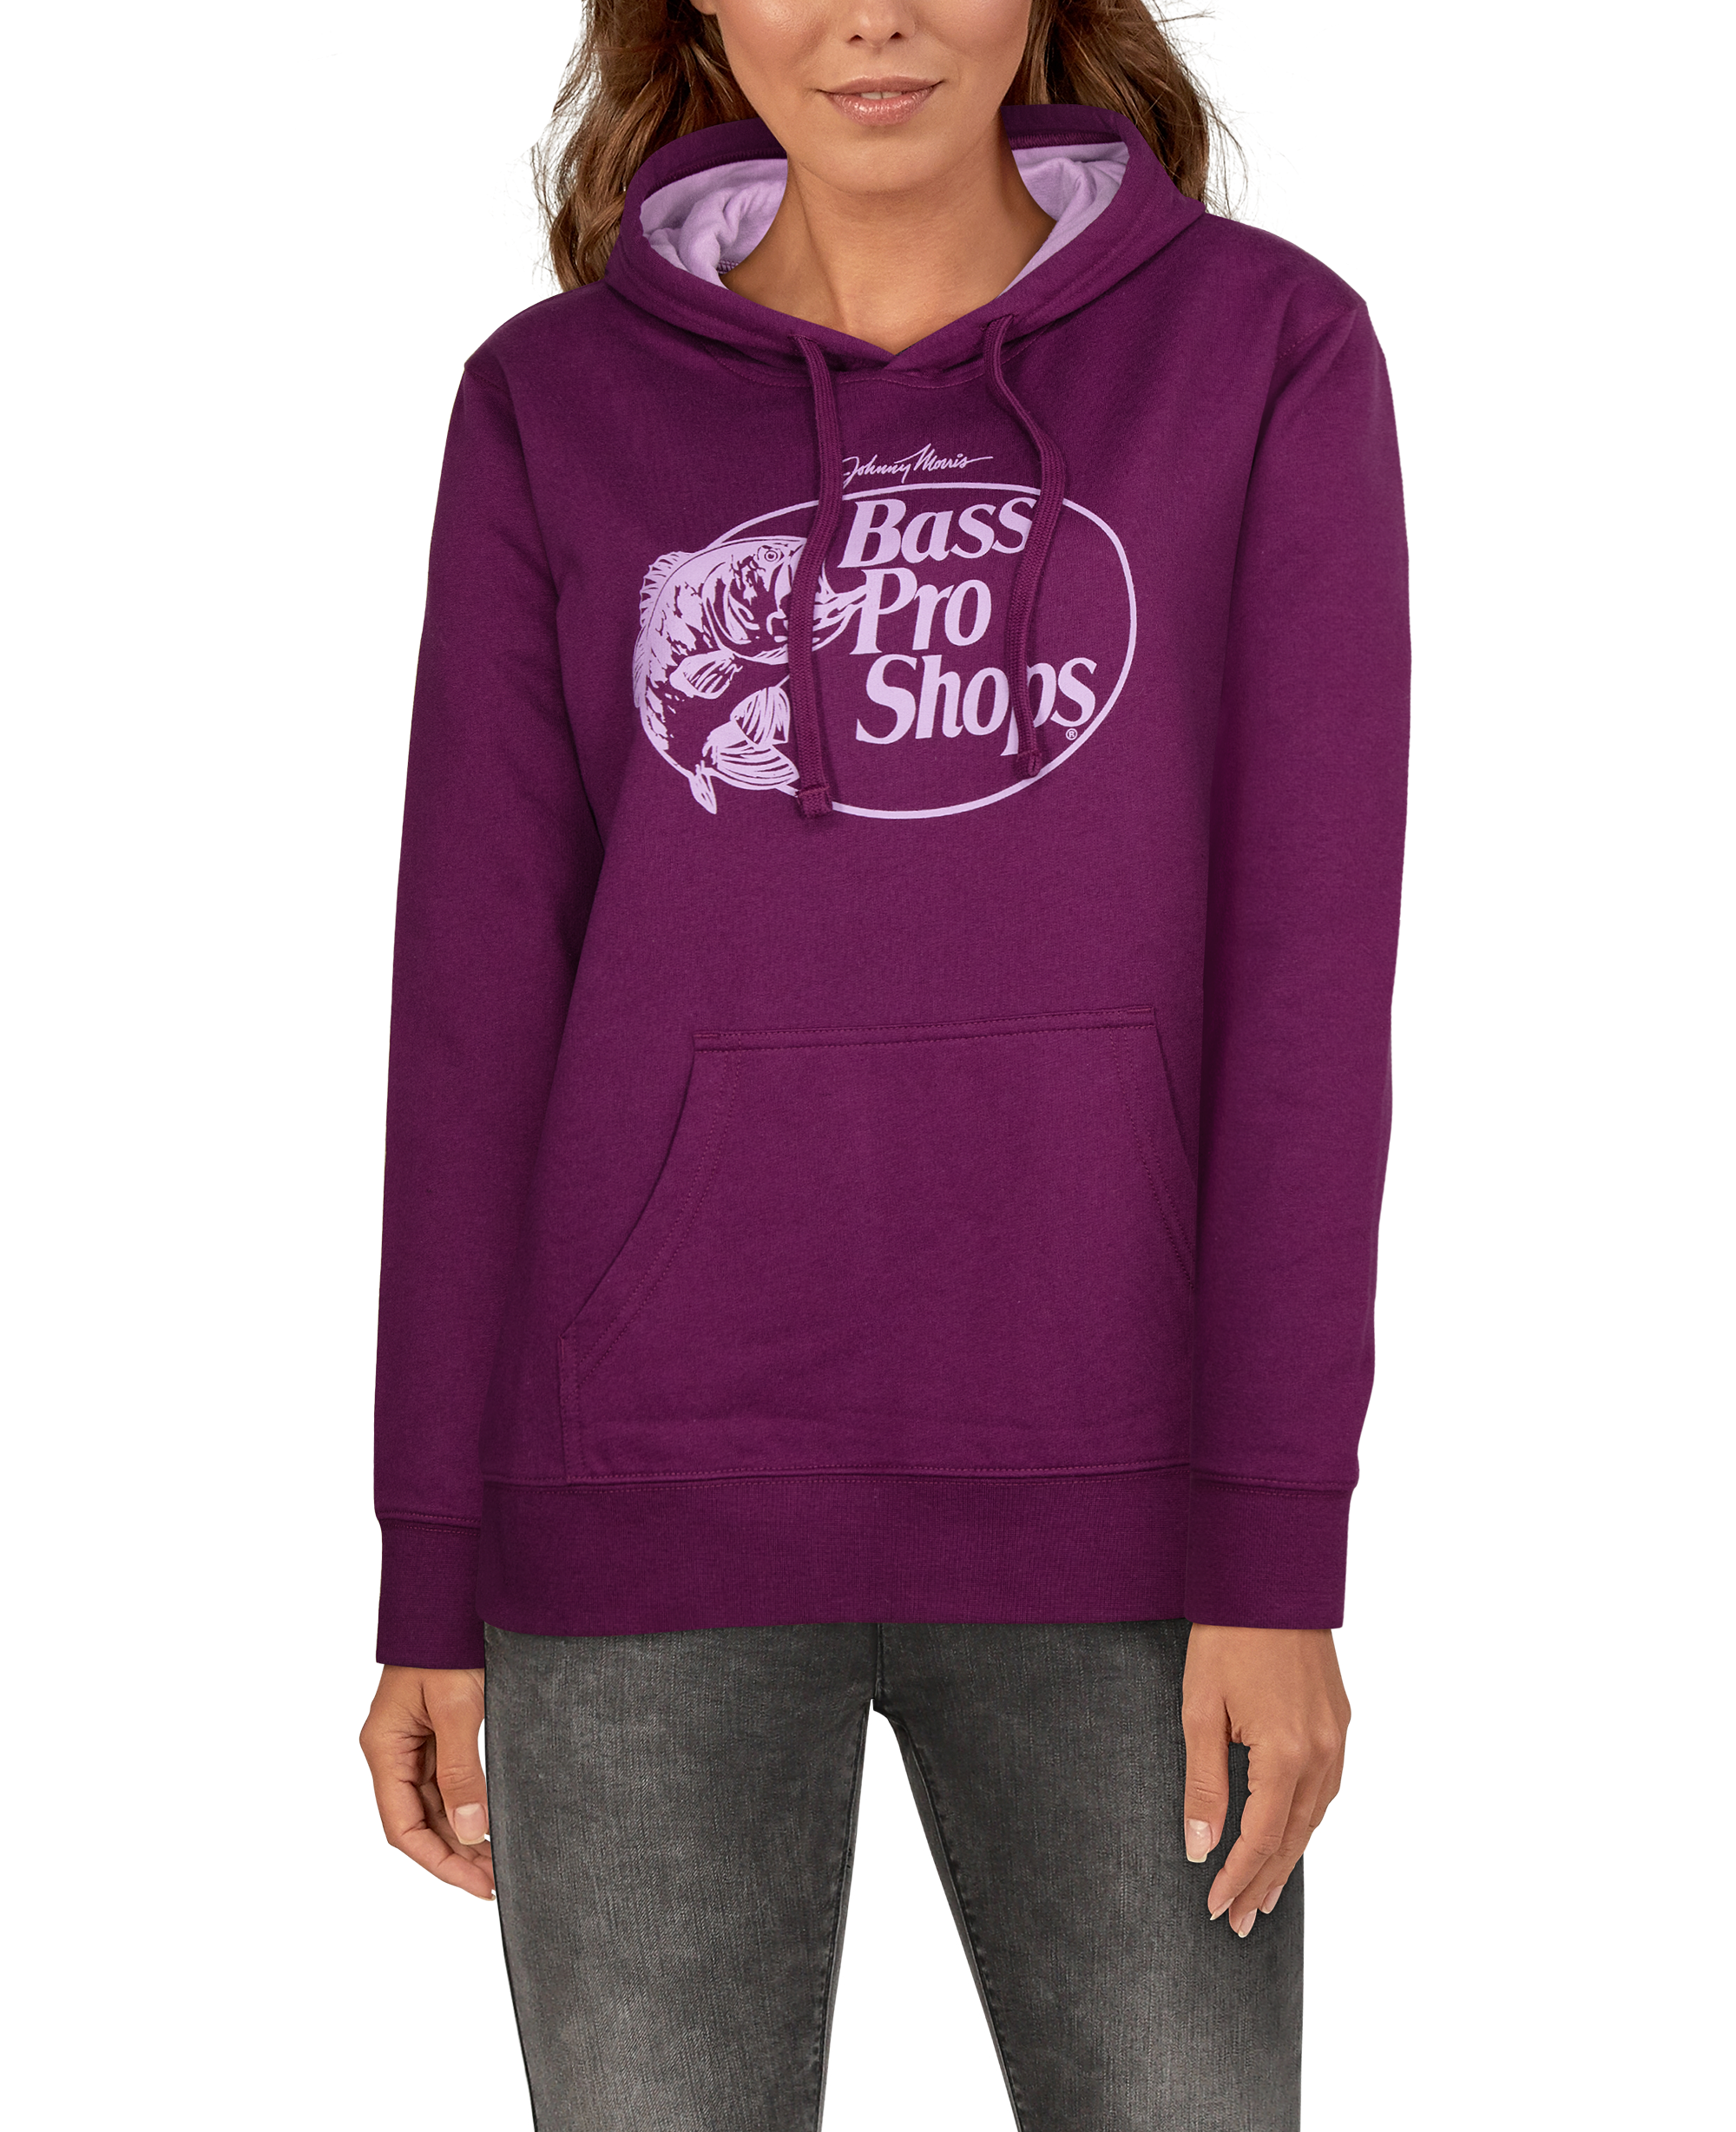 Bass Pro Shops Long-Sleeve Hoodie for Ladies